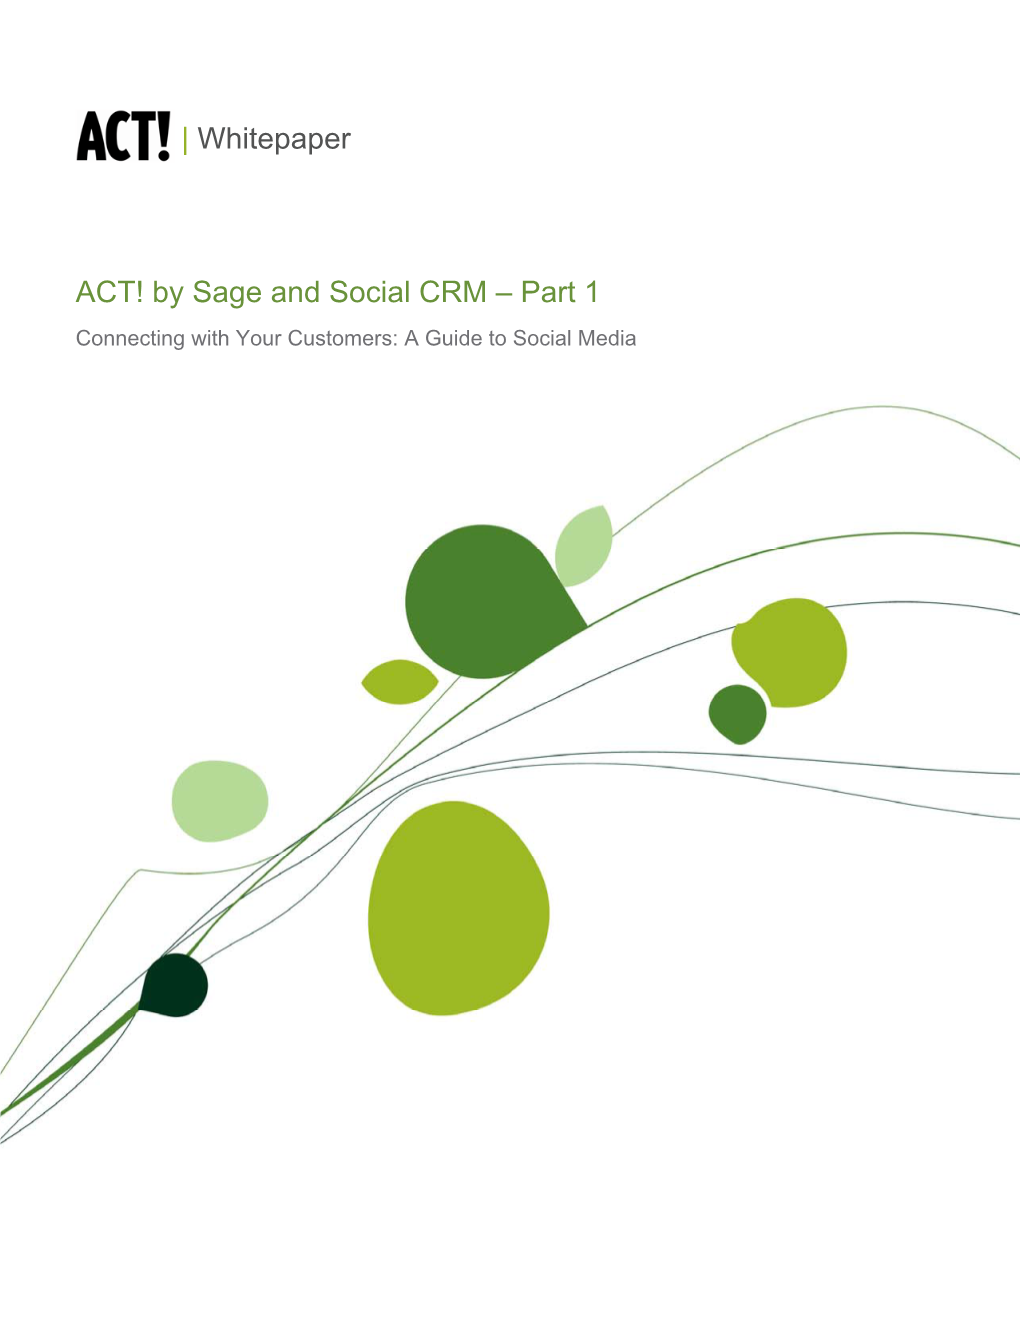 ACT! by Sage and Social CRM – Part 1 Connecting with Your Customers: a Guide to Social Media